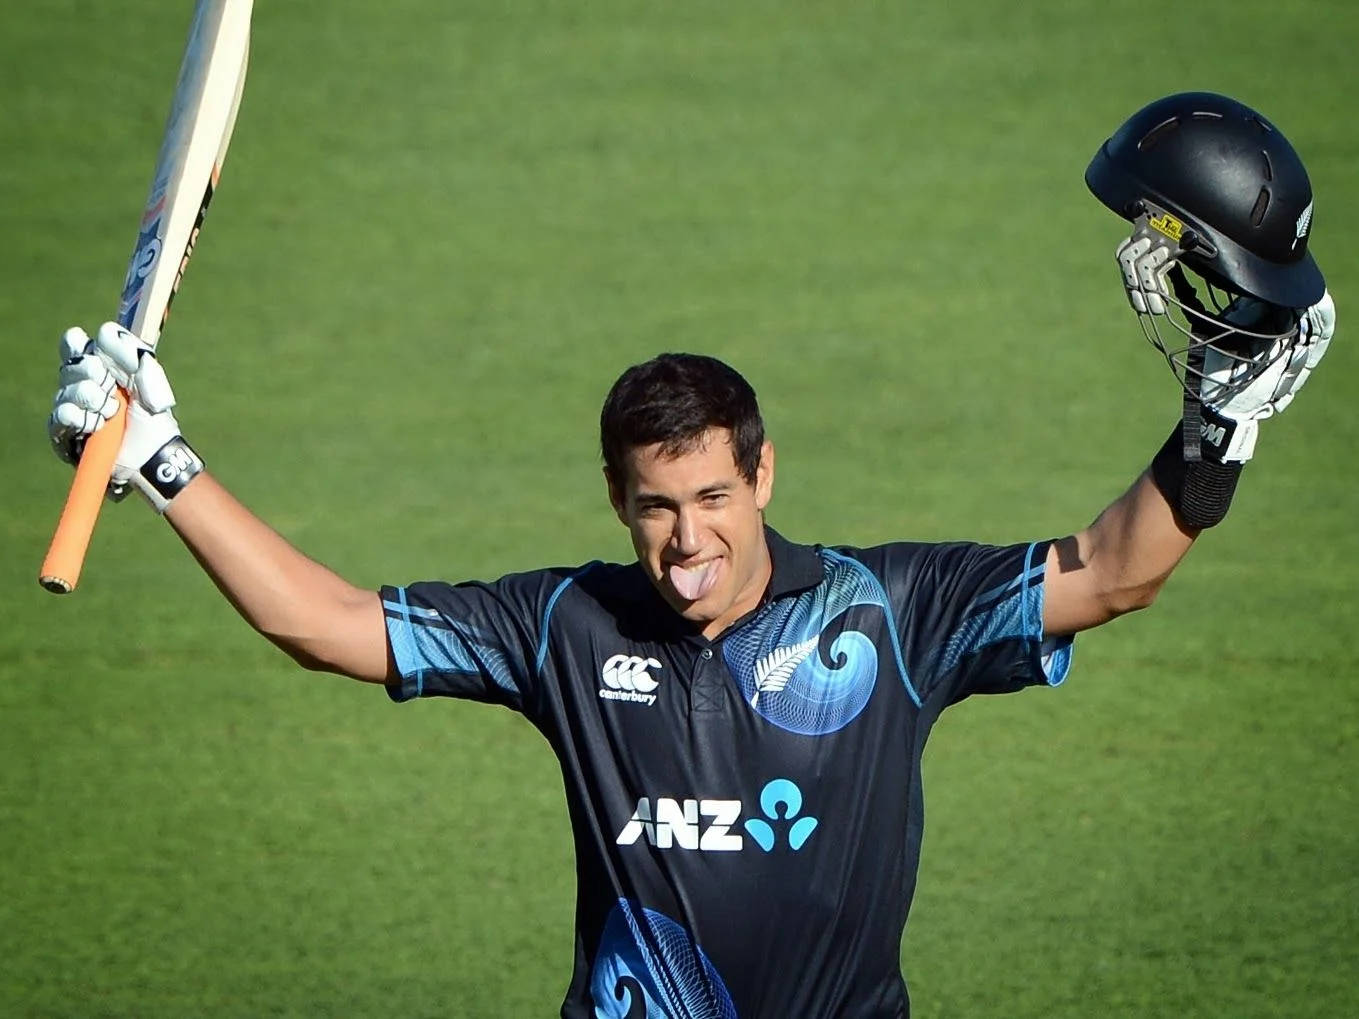 Tungaut Ross Taylor (as A Wallpaper Caption Or Title For An Image Of Ross Taylor Sticking His Tongue Out) Wallpaper